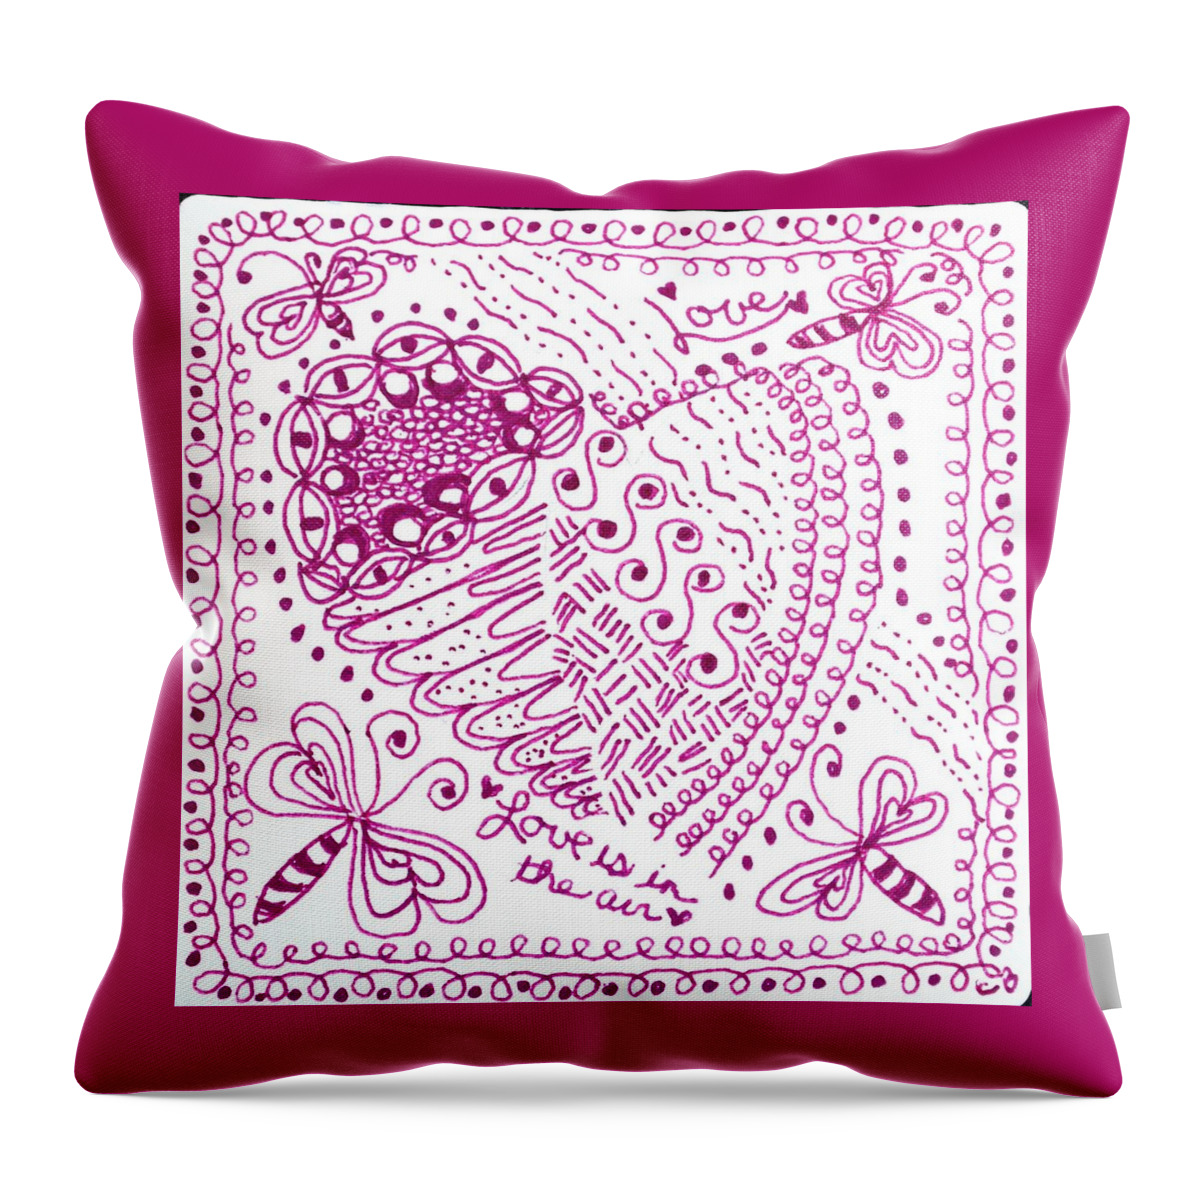 Caregiver Throw Pillow featuring the drawing Hearts by Carole Brecht